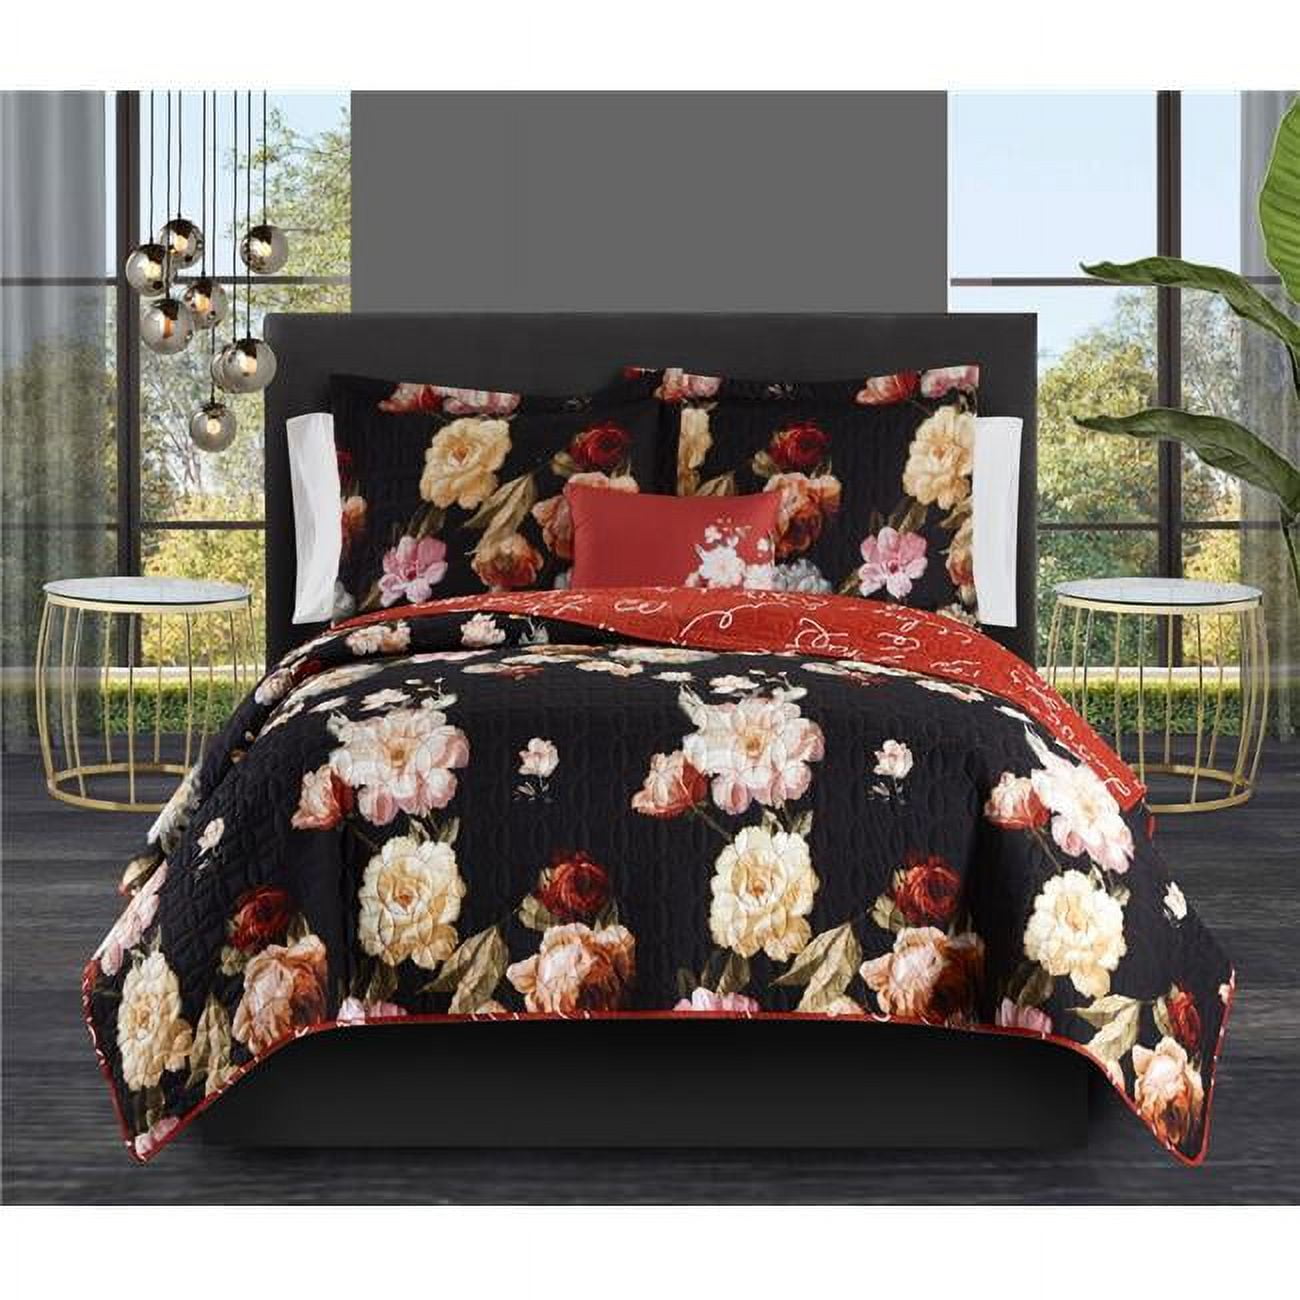 Picture of Chic Home BQS16676-BIB-US Eulalia 8 Piece Reversible Quilt Set for Floral Print Cursive Script Design Bed in a Bag - Sheet Set Decorative Pillow Shams Included&#44; Queen Size